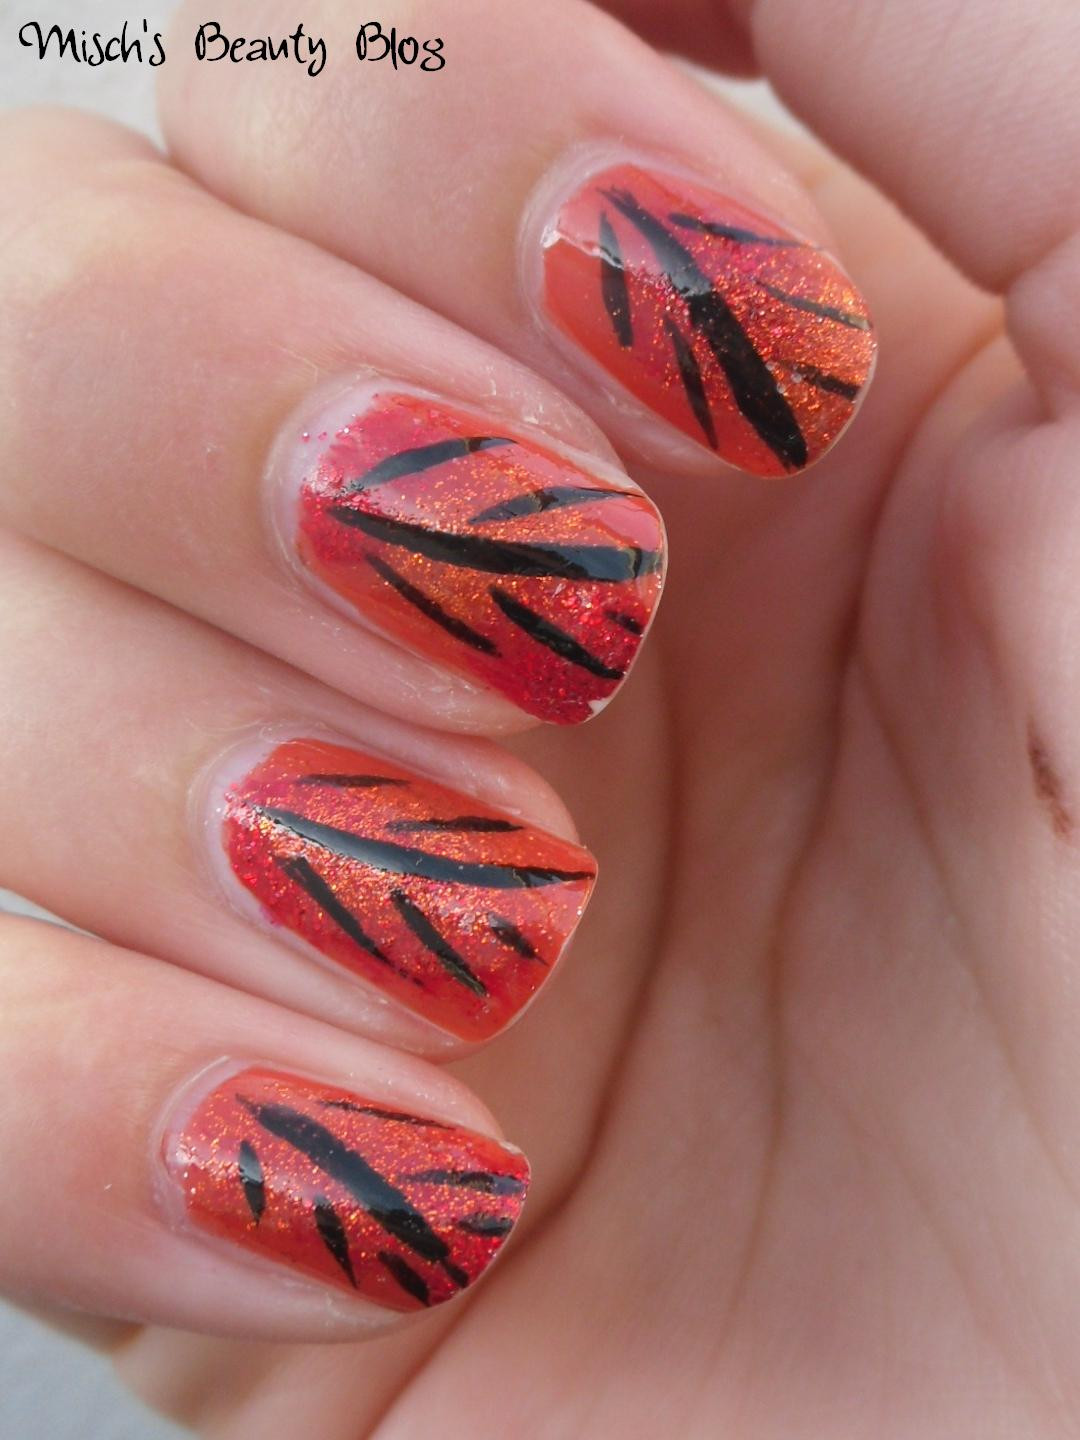 Fall Leaves Nail Designs
 Misch s Beauty Blog NOTD September 29th Fall Leaf Nail Art